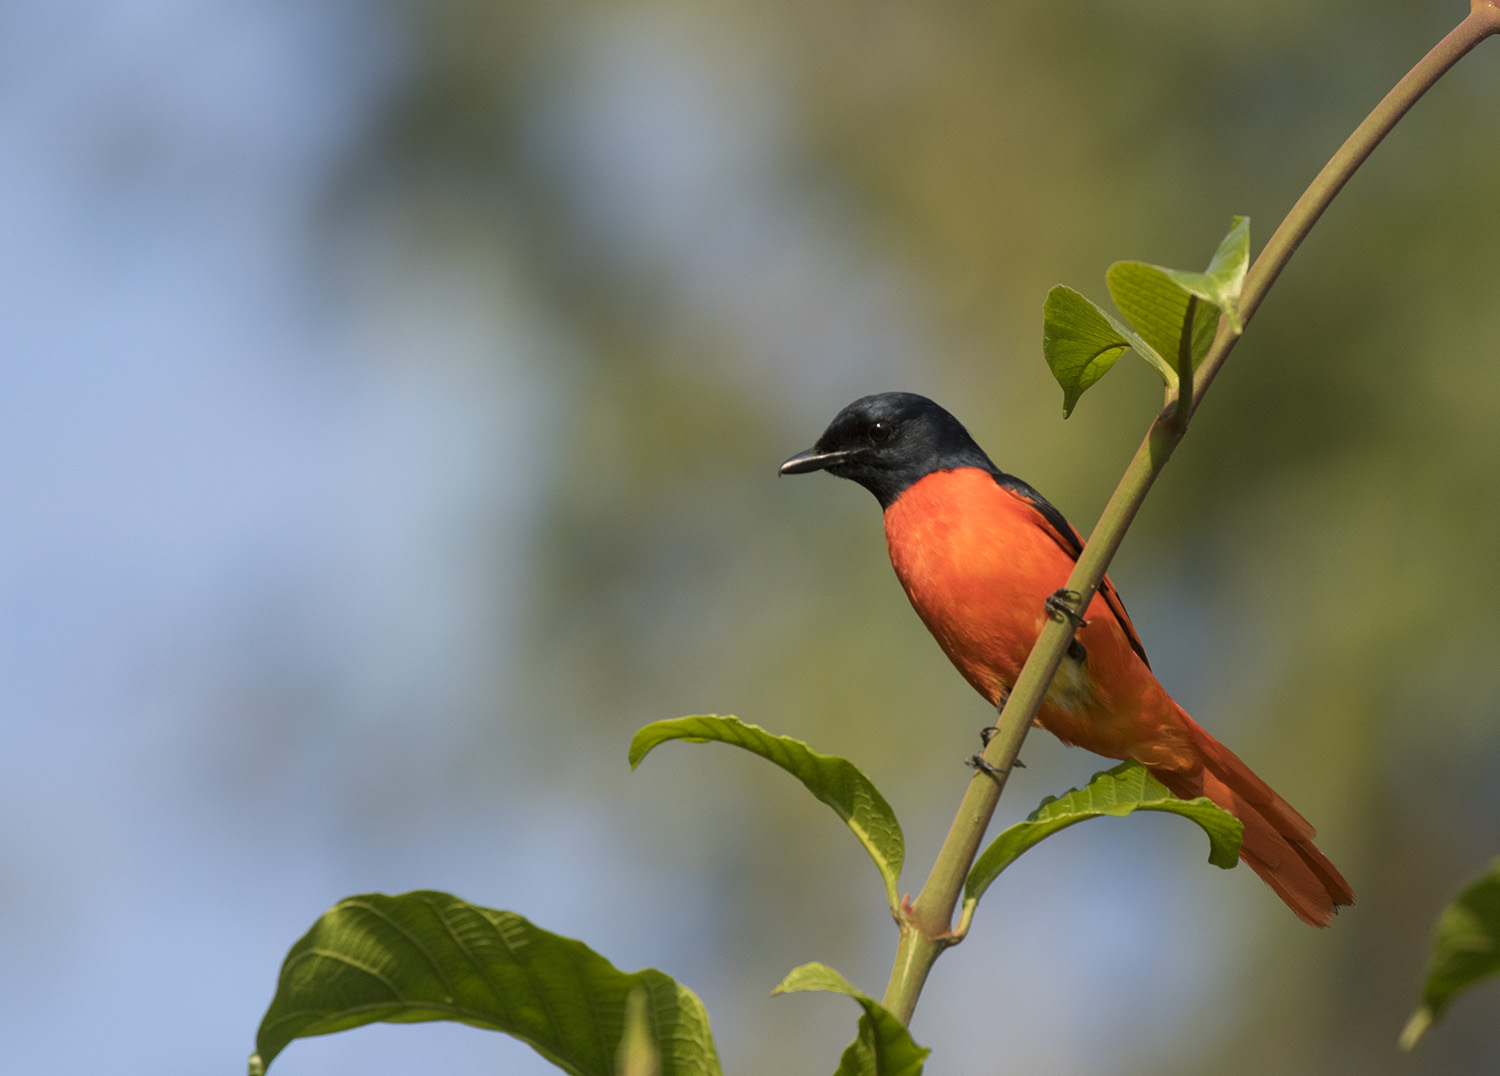 Birdwatching tours to India - Scarlet Minivet is always a treat!